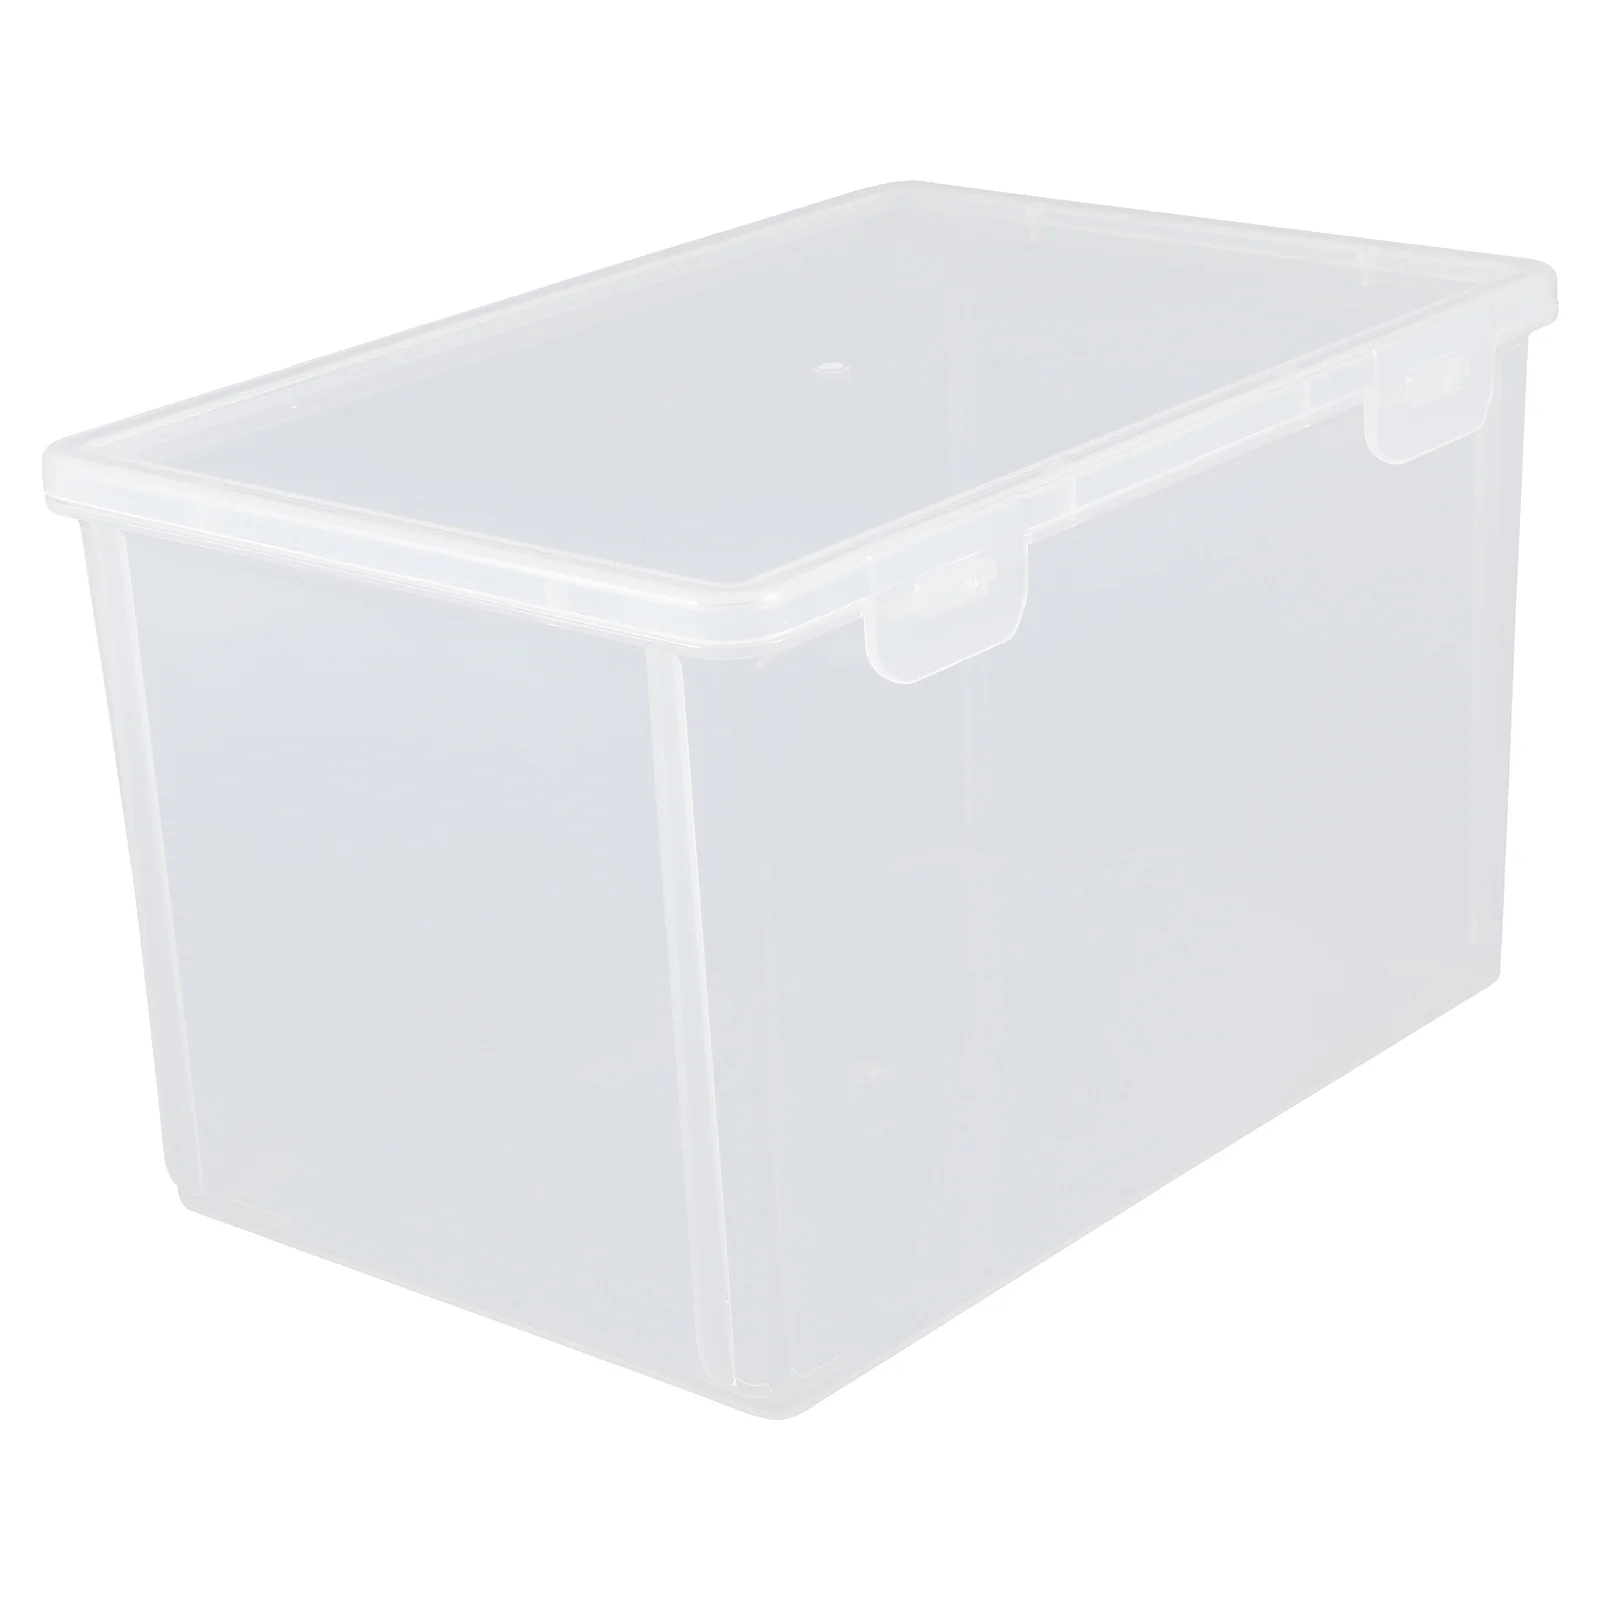 

Bread Storage Box Toast Container Fridge Sealing Clear Plastic Bins Food Fresh Keep Pp Fruit Canister Kitchen Supply Sealed